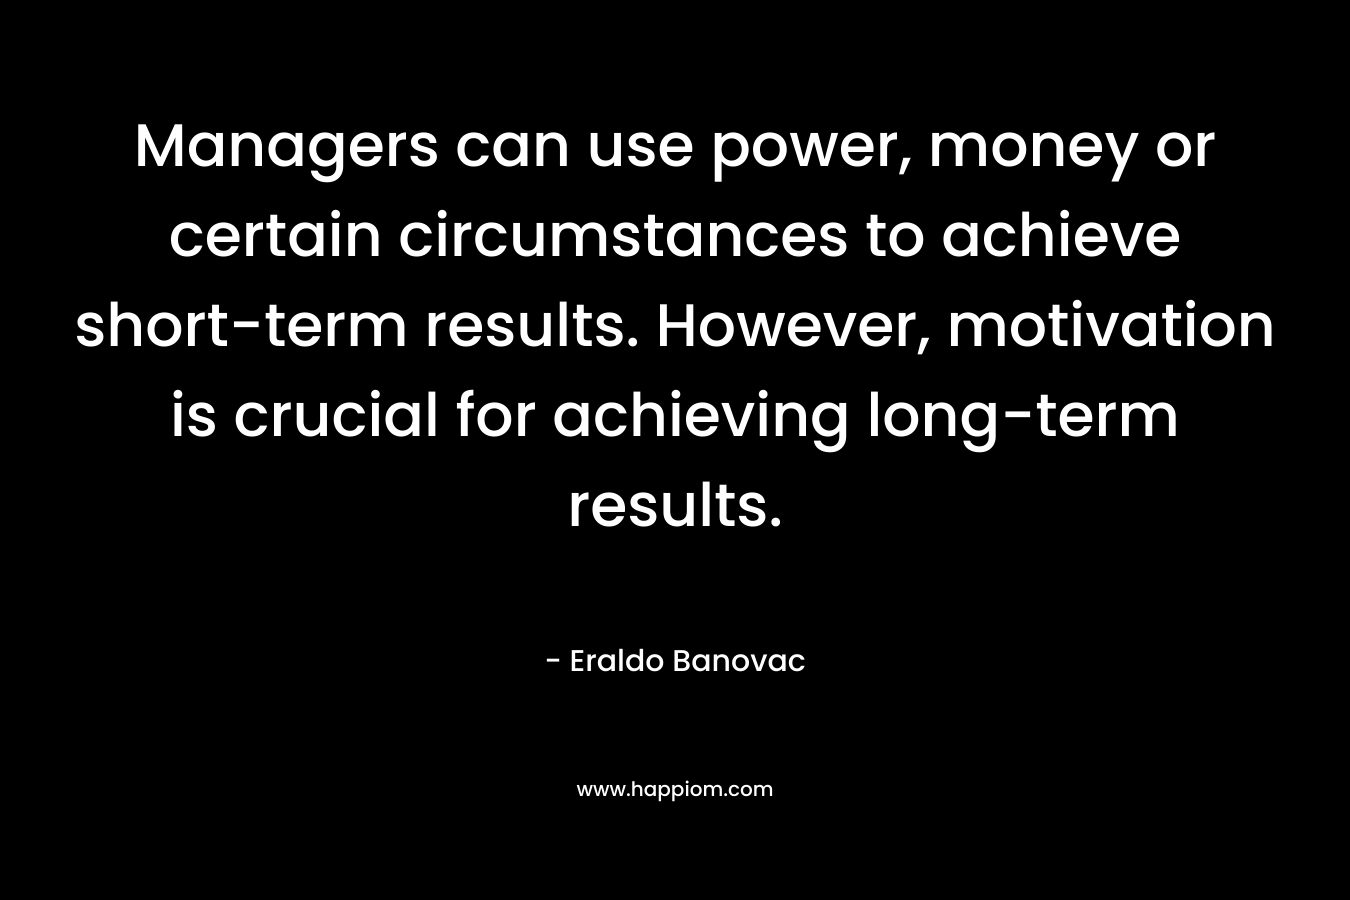 Managers can use power, money or certain circumstances to achieve short-term results. However, motivation is crucial for achieving long-term results. – Eraldo Banovac